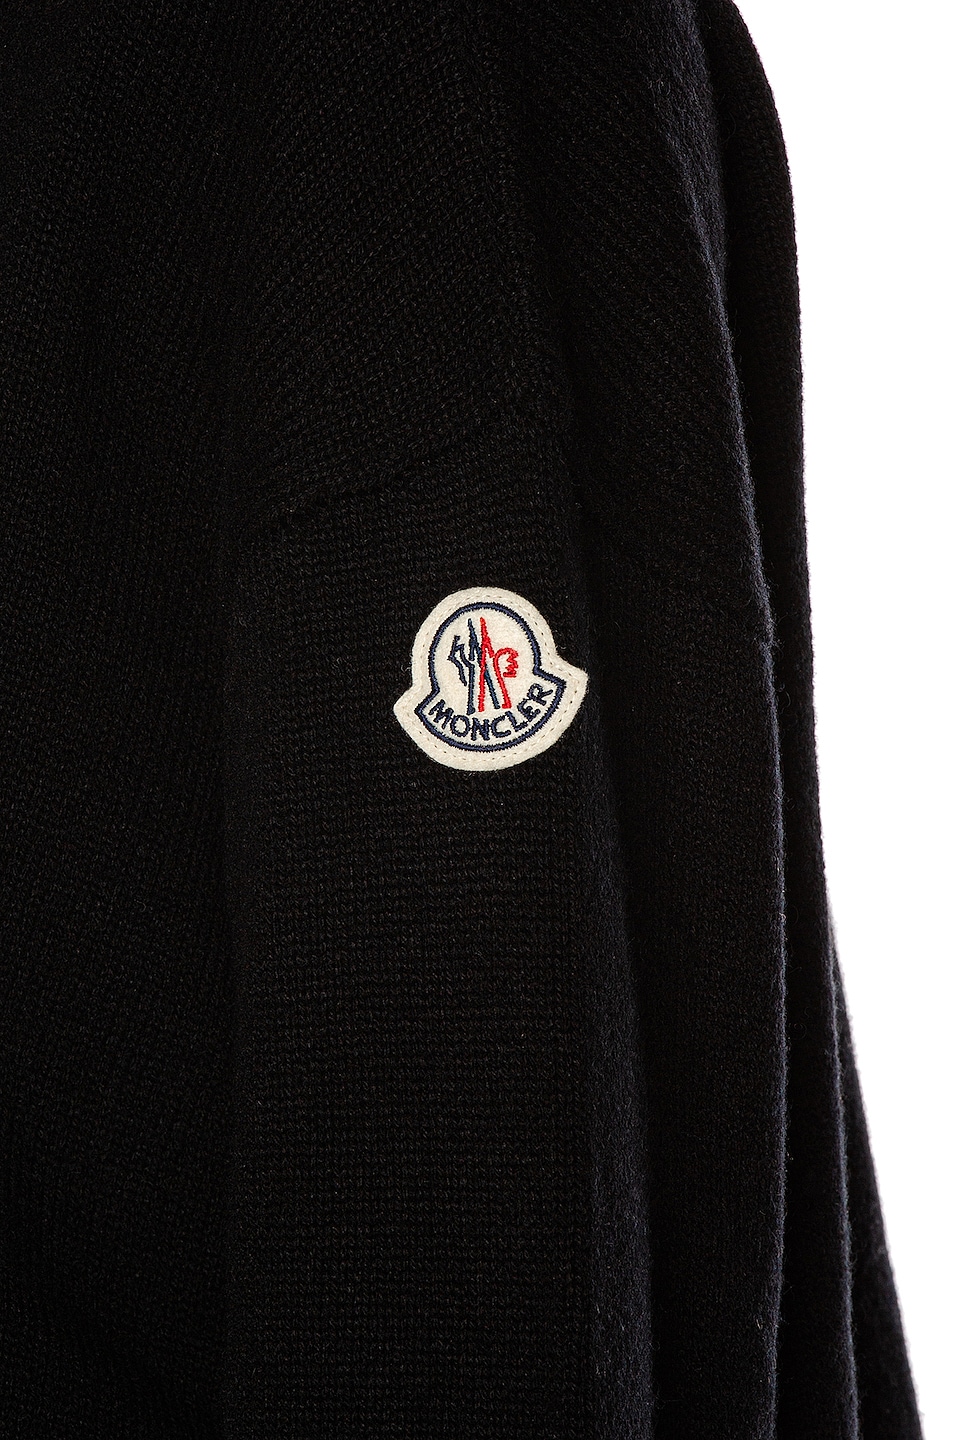 Moncler Lupetto Tricot Sweater in Black | FWRD